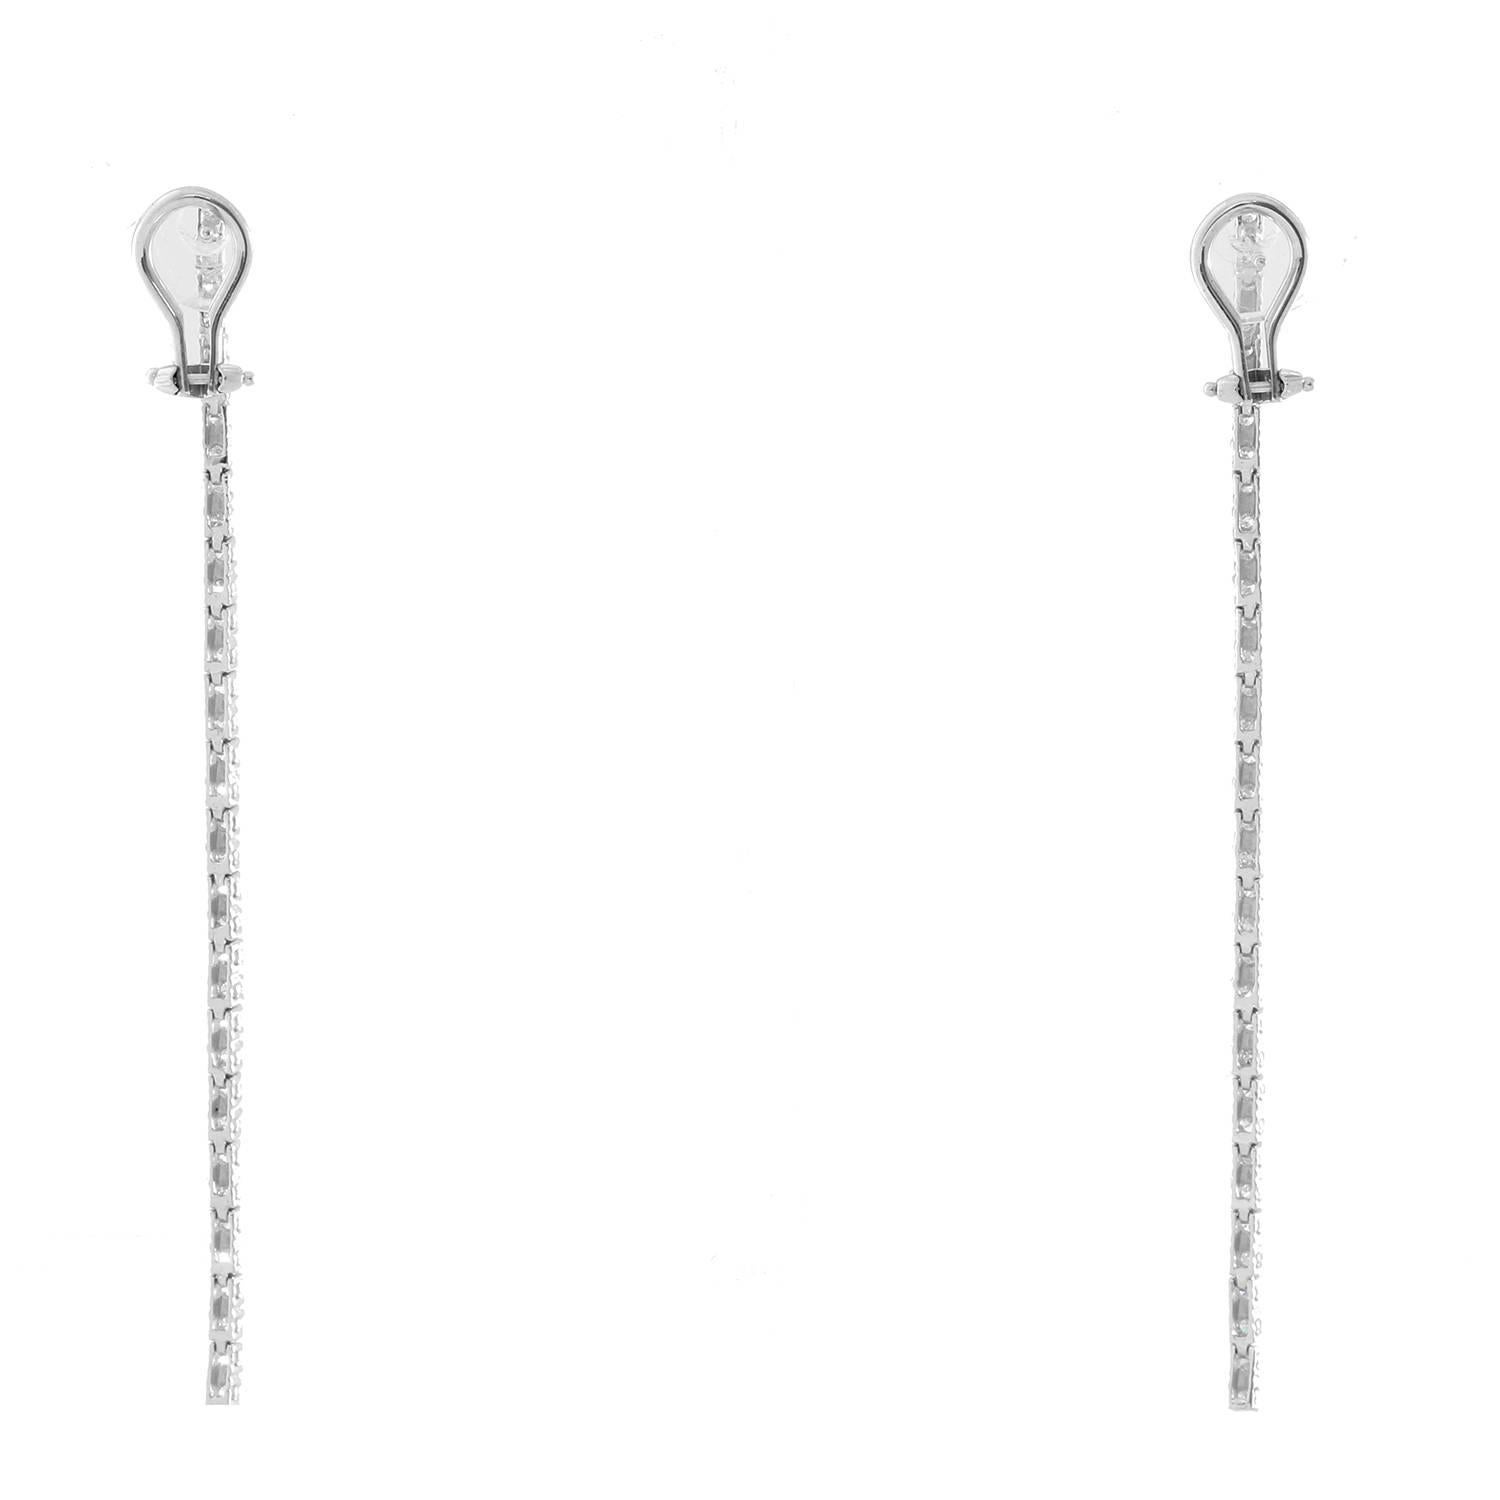 18K White Gold Straight Line Dangle Diamond Earrings - . Stunning one row dangle earrings. Round brilliant diamonds totaling 1.11 ct. Clarity I1, Color G. Total weight 6.8 grams. 3 inches from top to bottom.